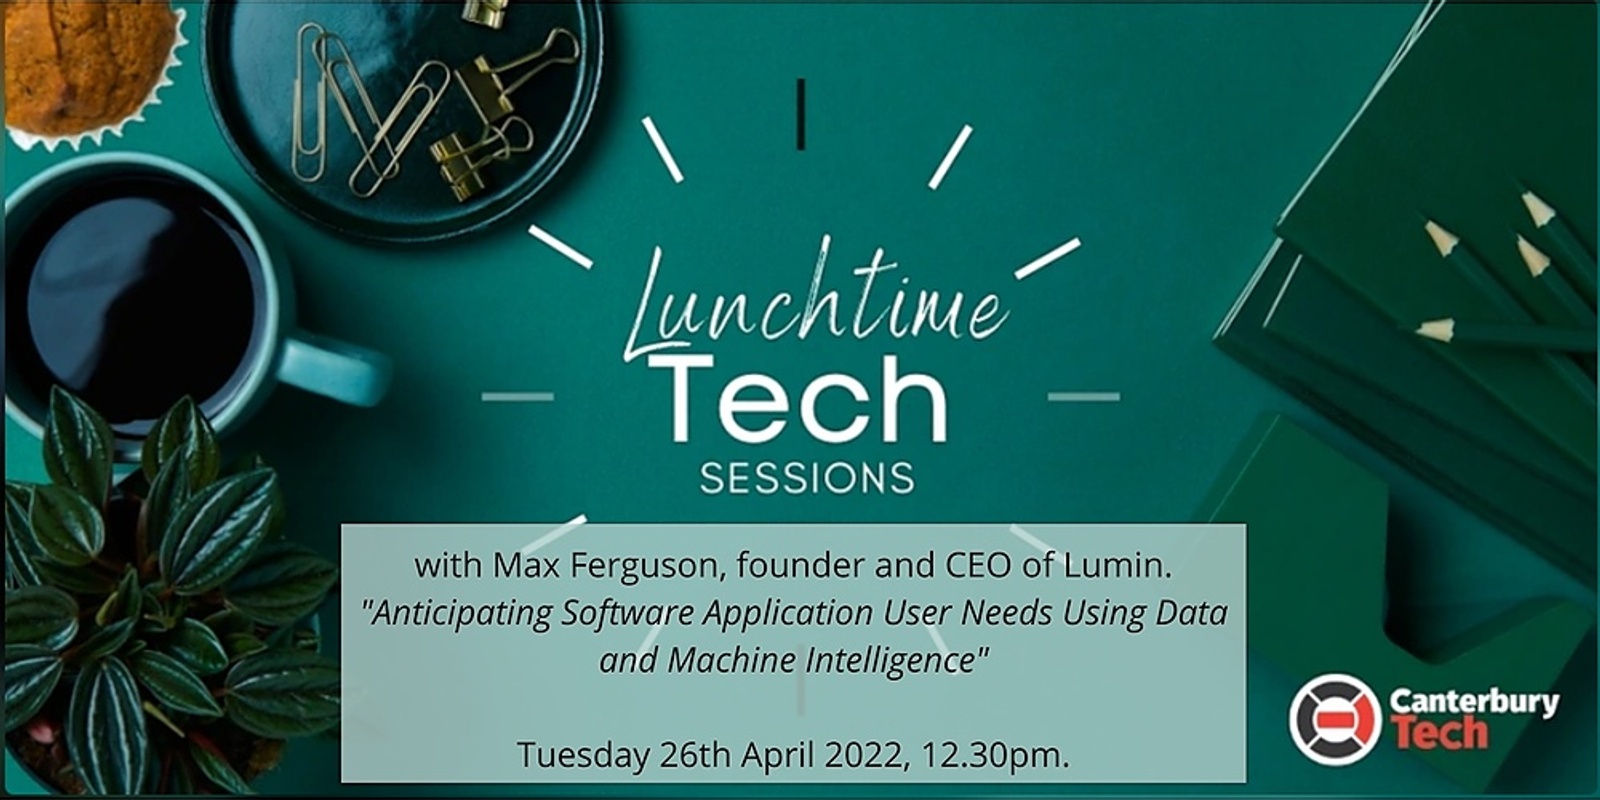 Banner image for Lunchtime Tech Sessions by Canterbury Tech - 26th April 2022